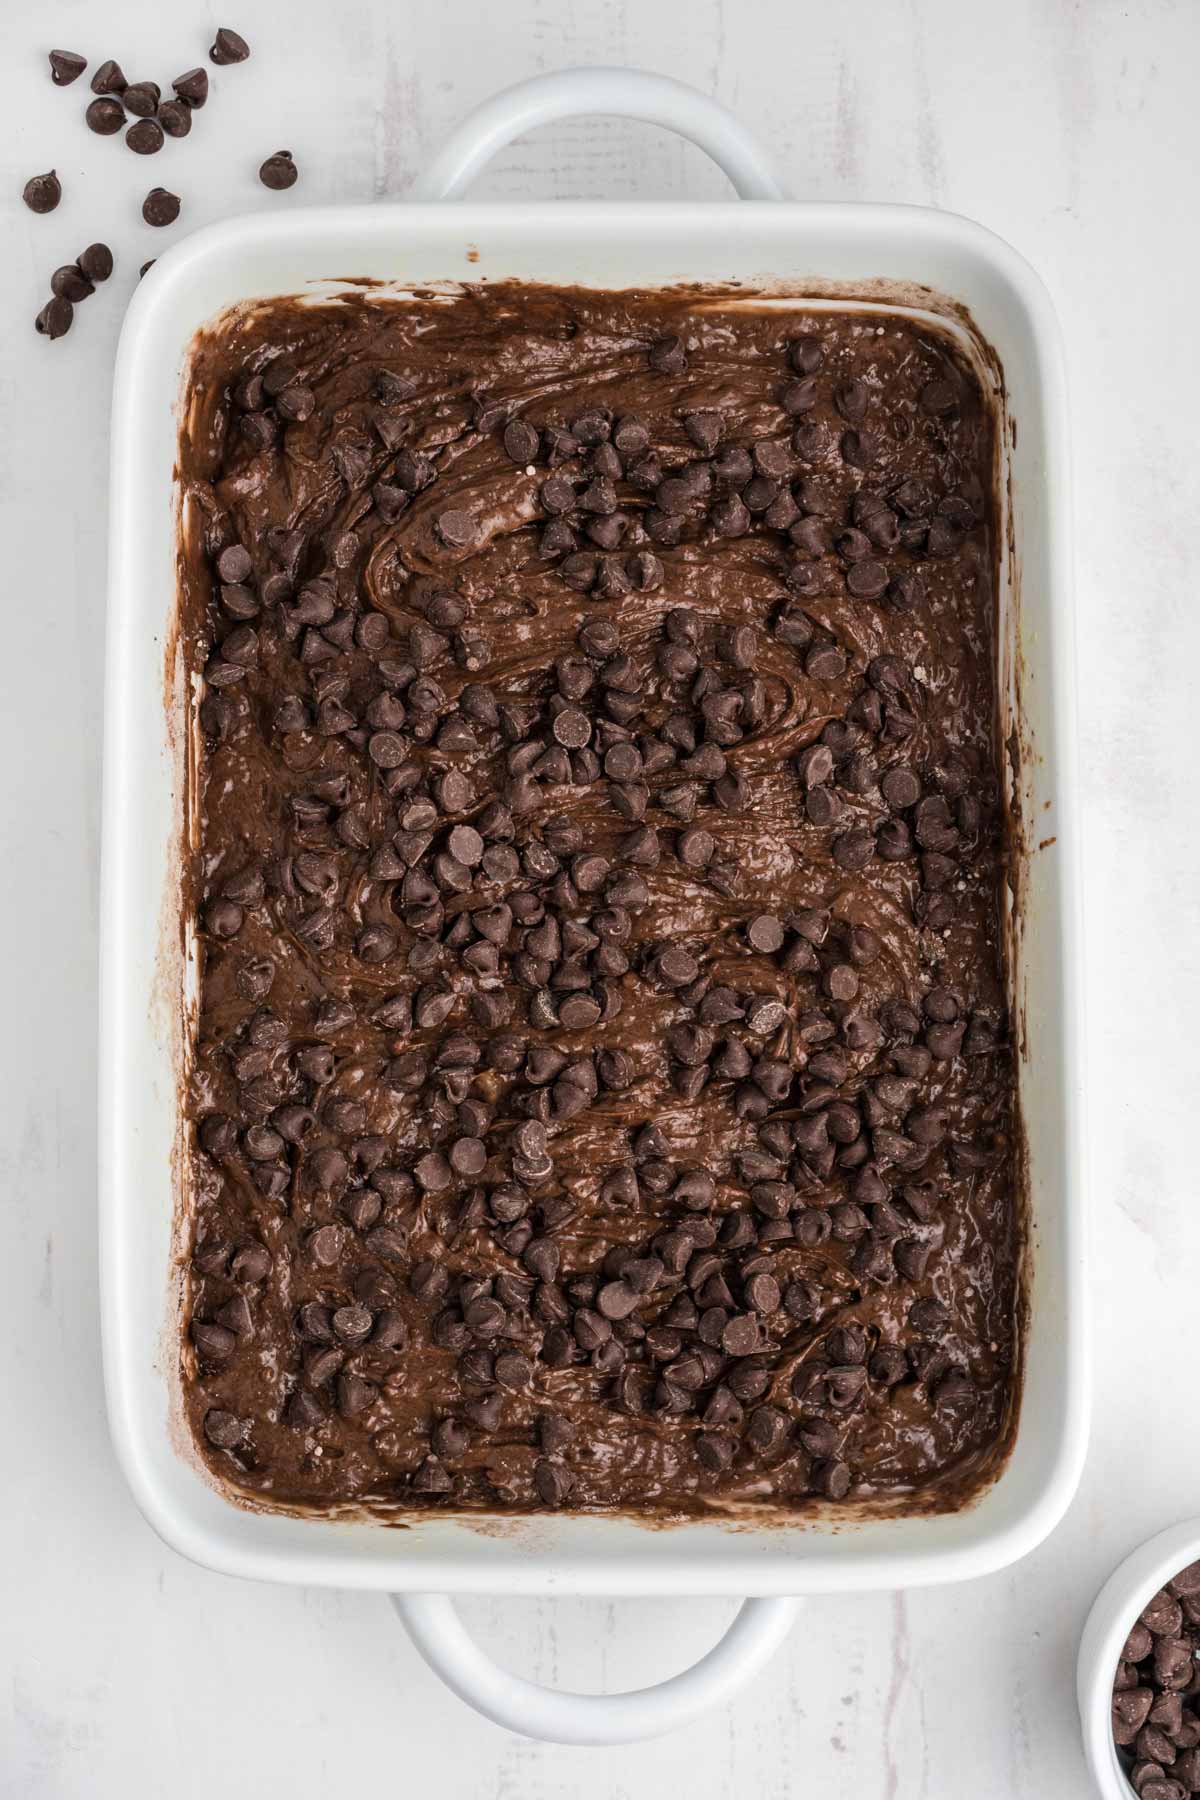 Chocolate chips over the top of the dump cake mixture.